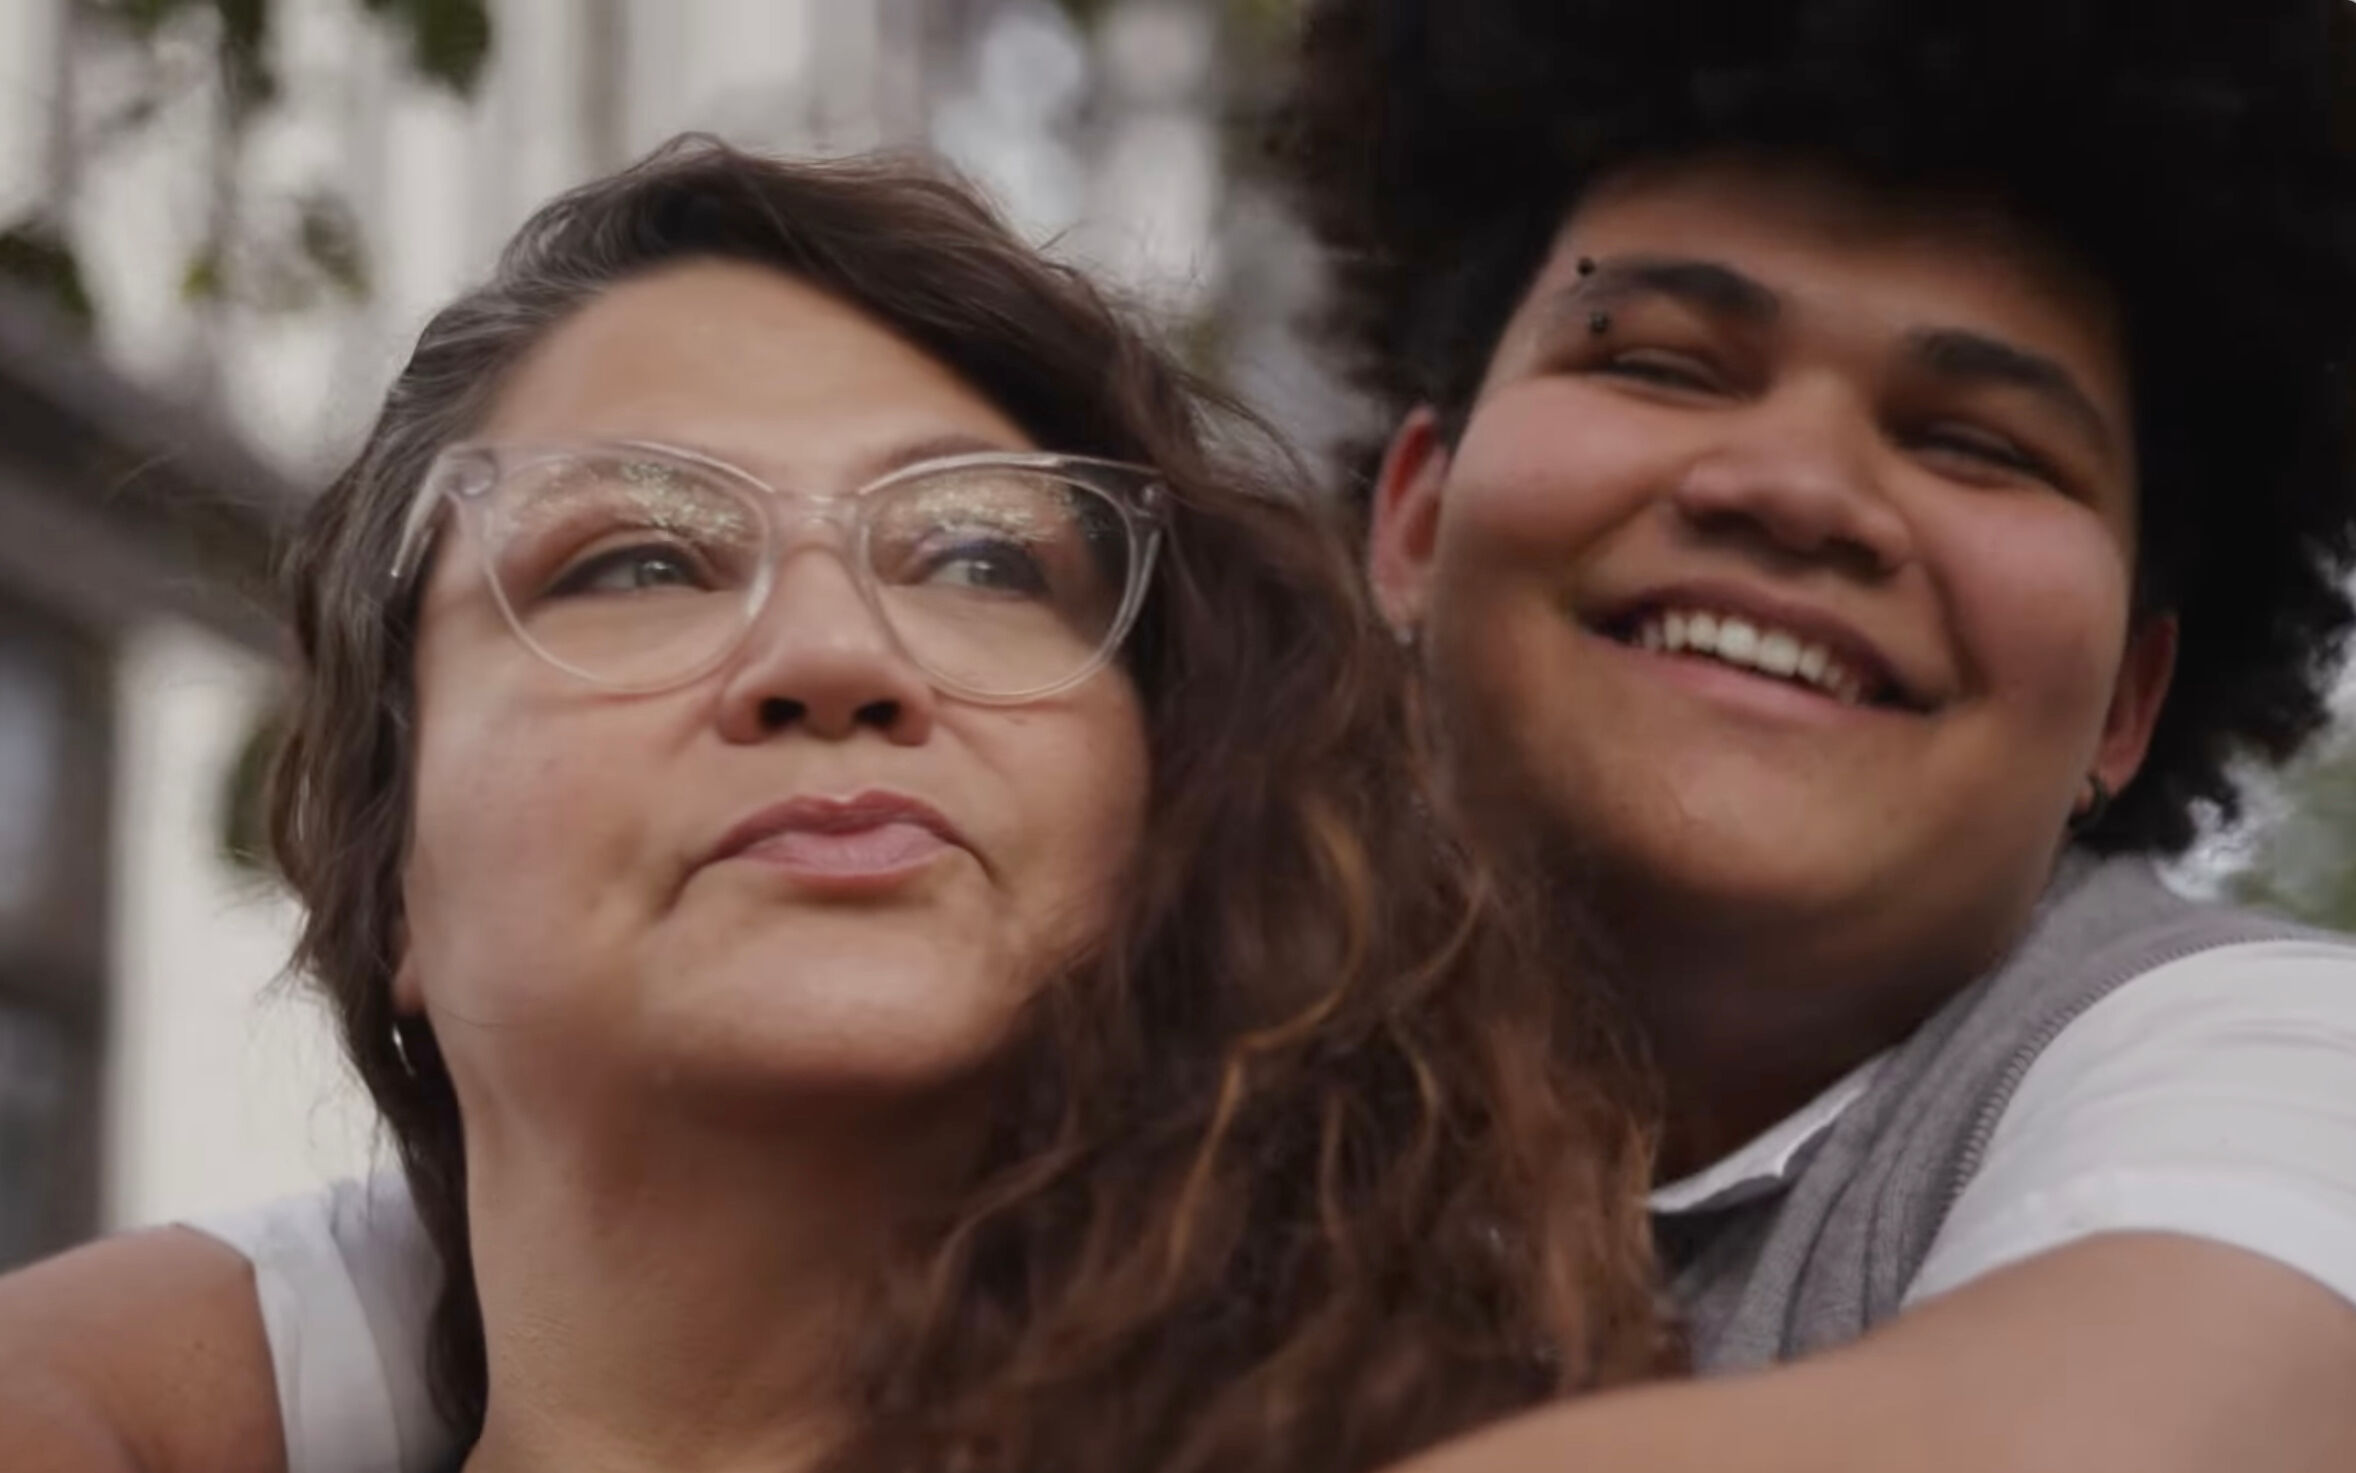 Myriam and Cameron in NCLR's "Healthcare is Caring" PSA.